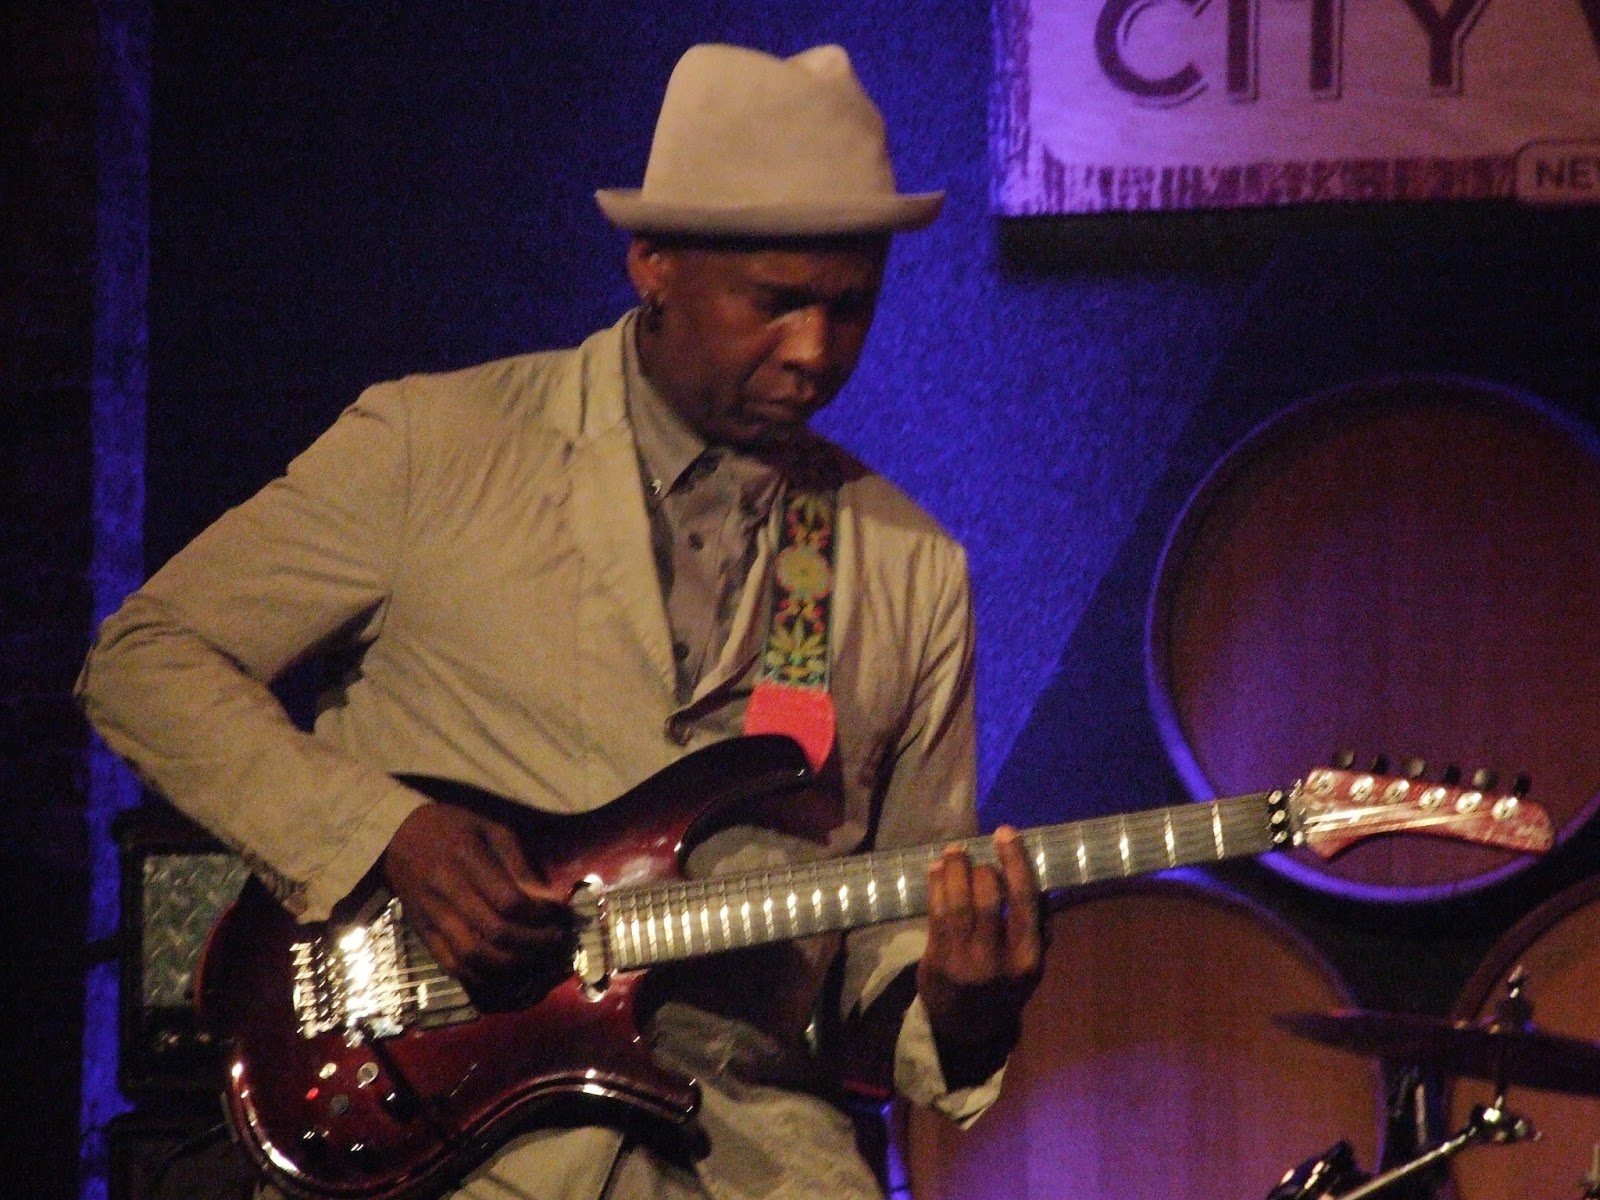 Living Colour - Live Photos from City Winery, NYC 6/1/14